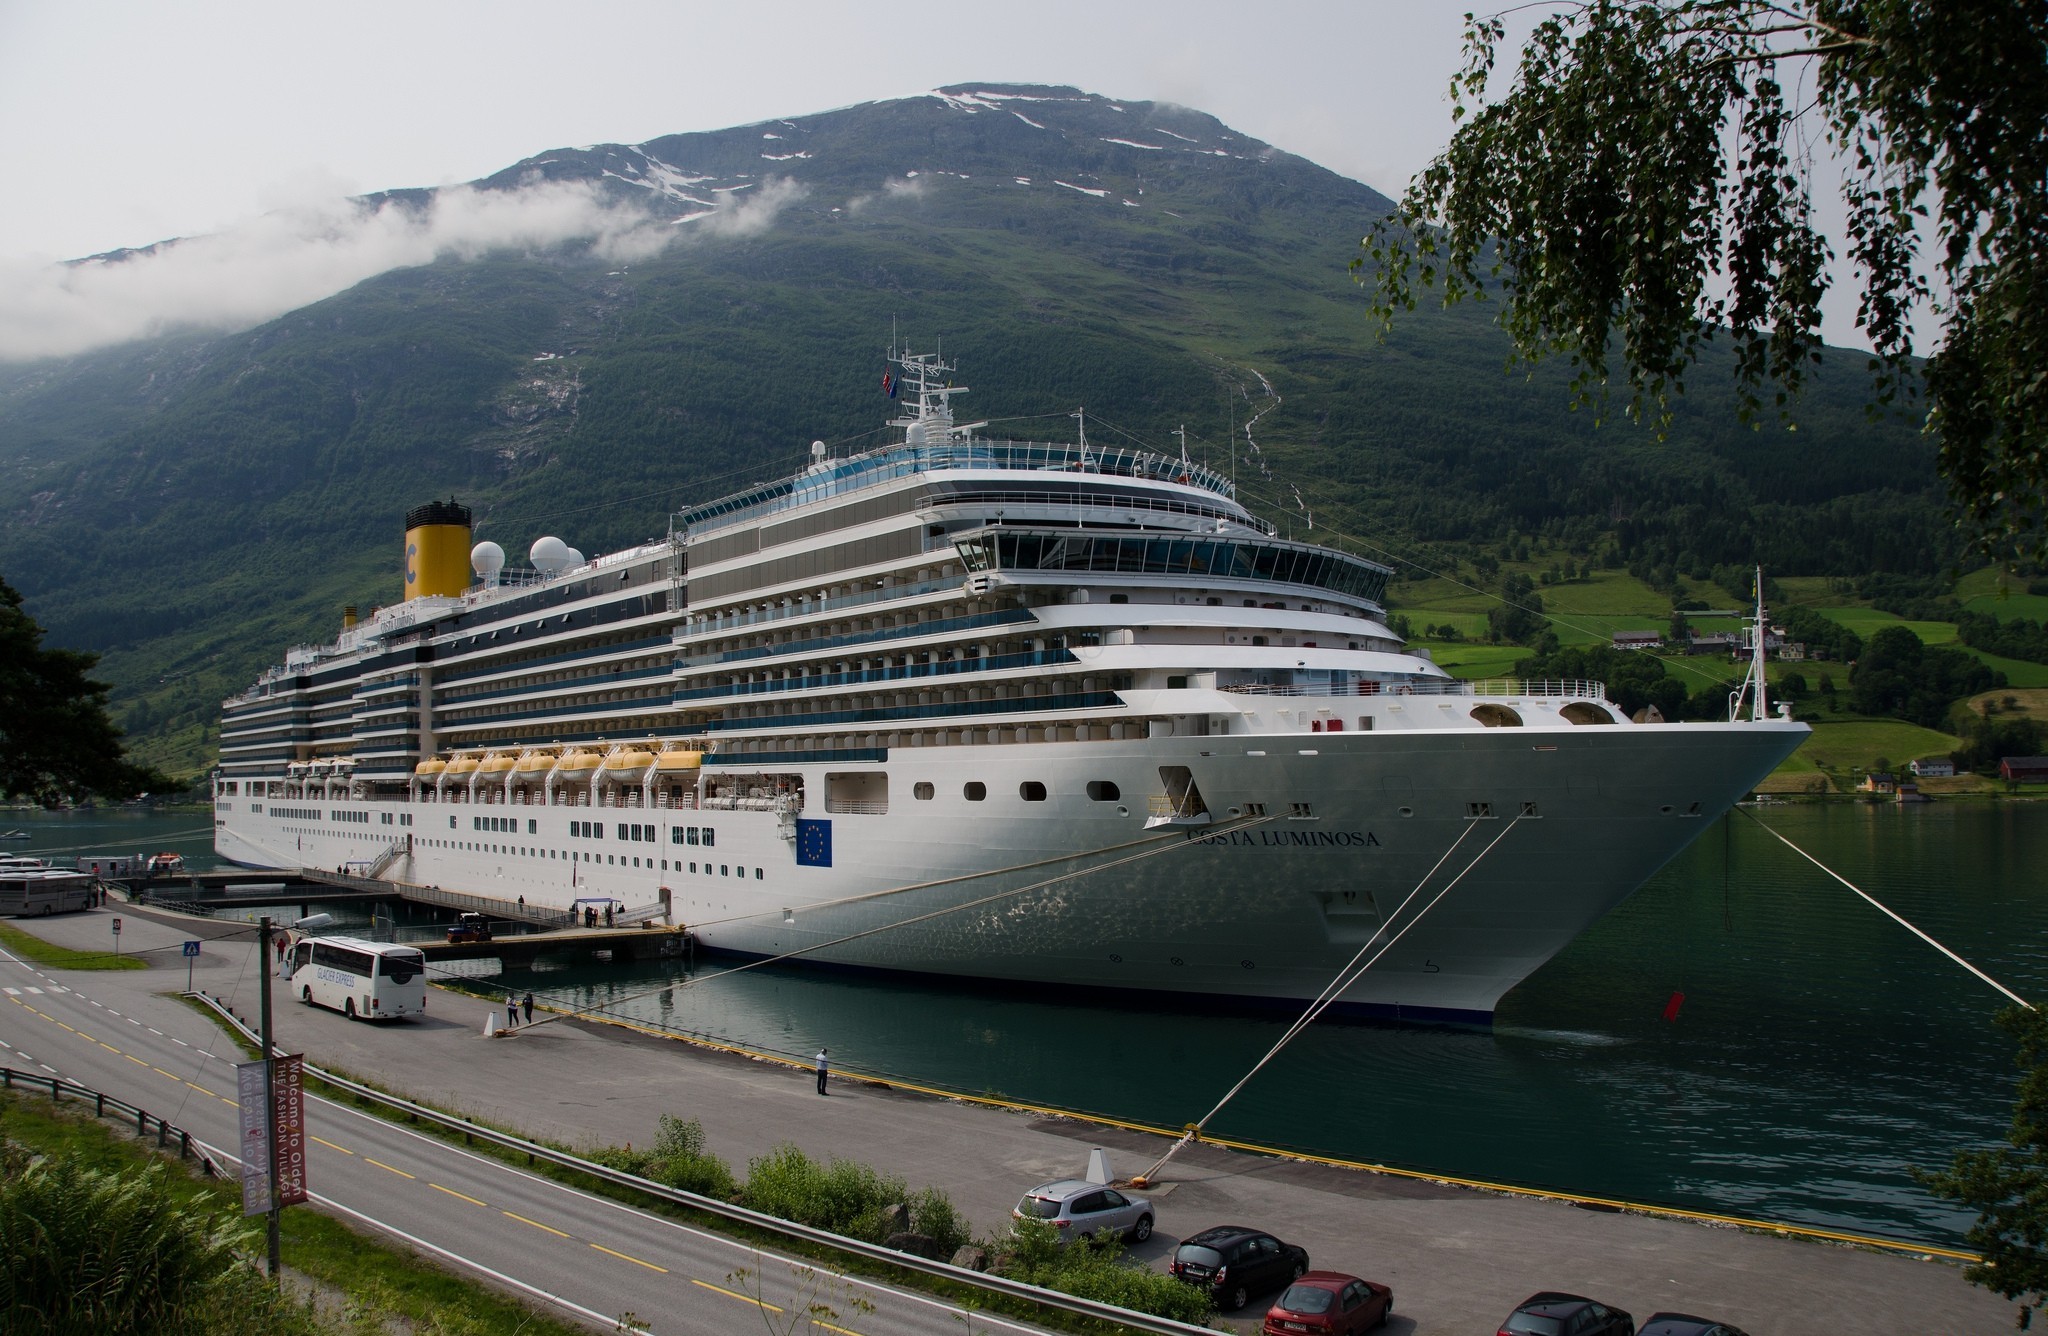 cruise ship, vehicles, hill, liner, cruise ships